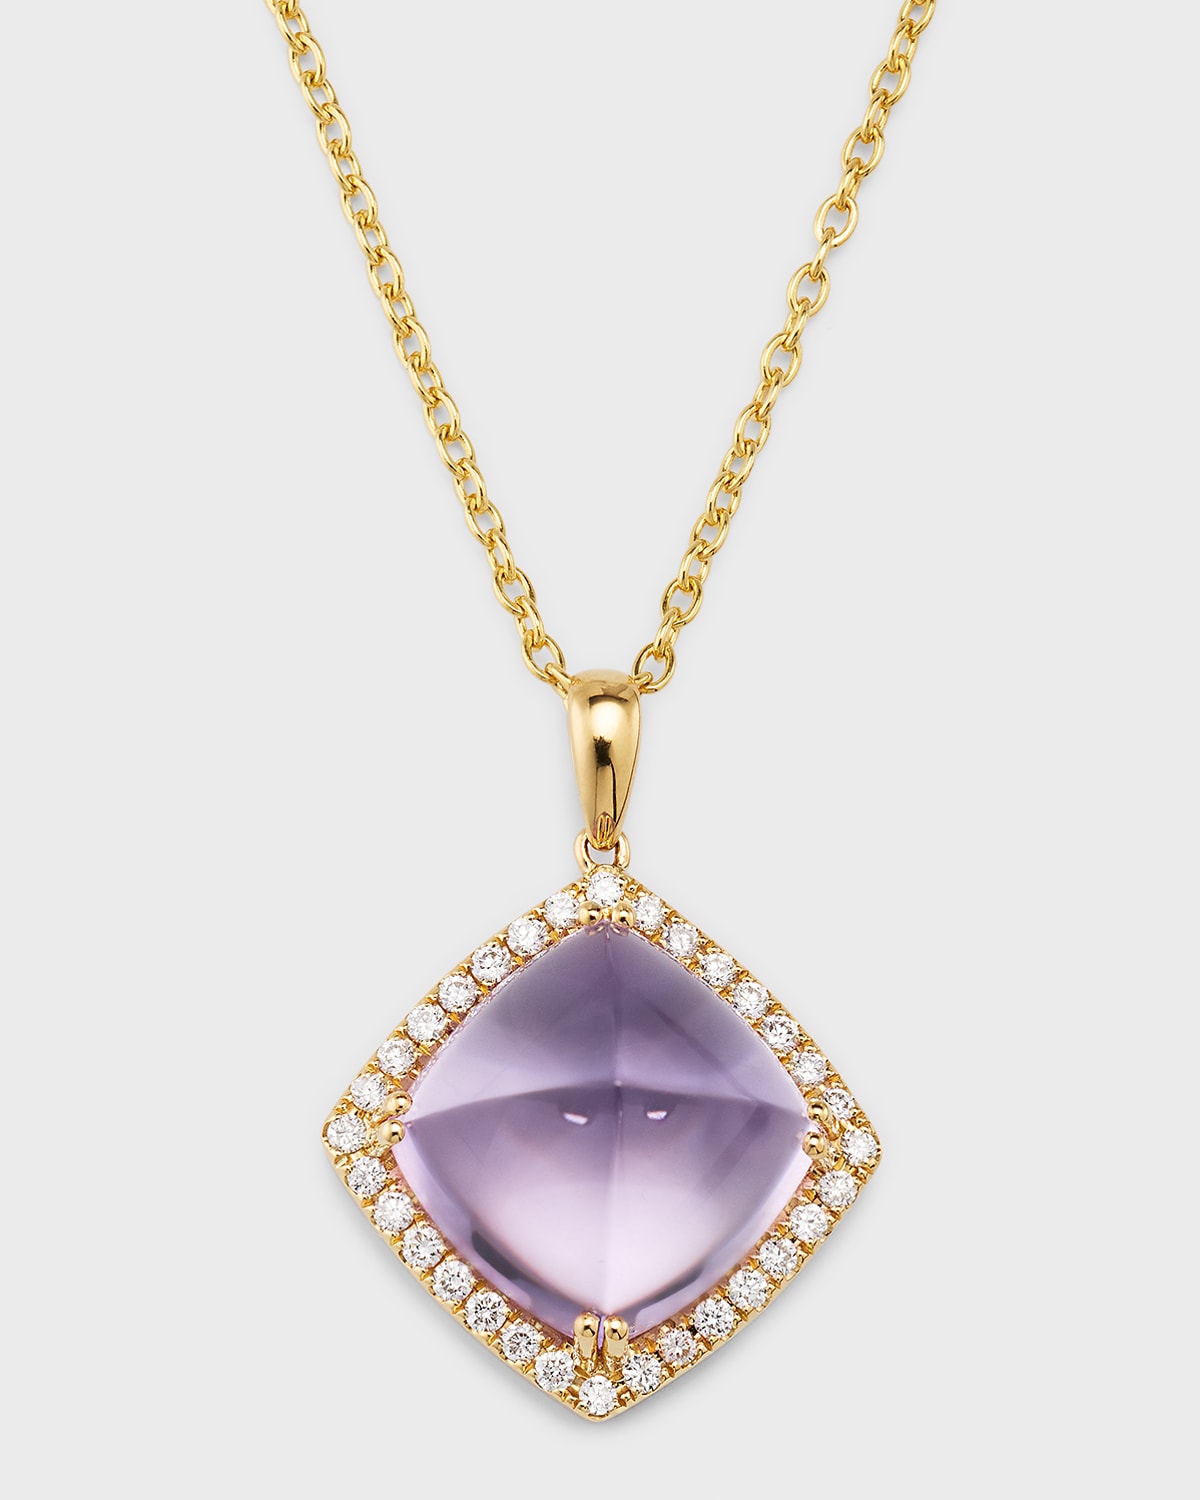 18K Yellow Gold Pendant with Amethyst and Diamonds, 8.51tcw